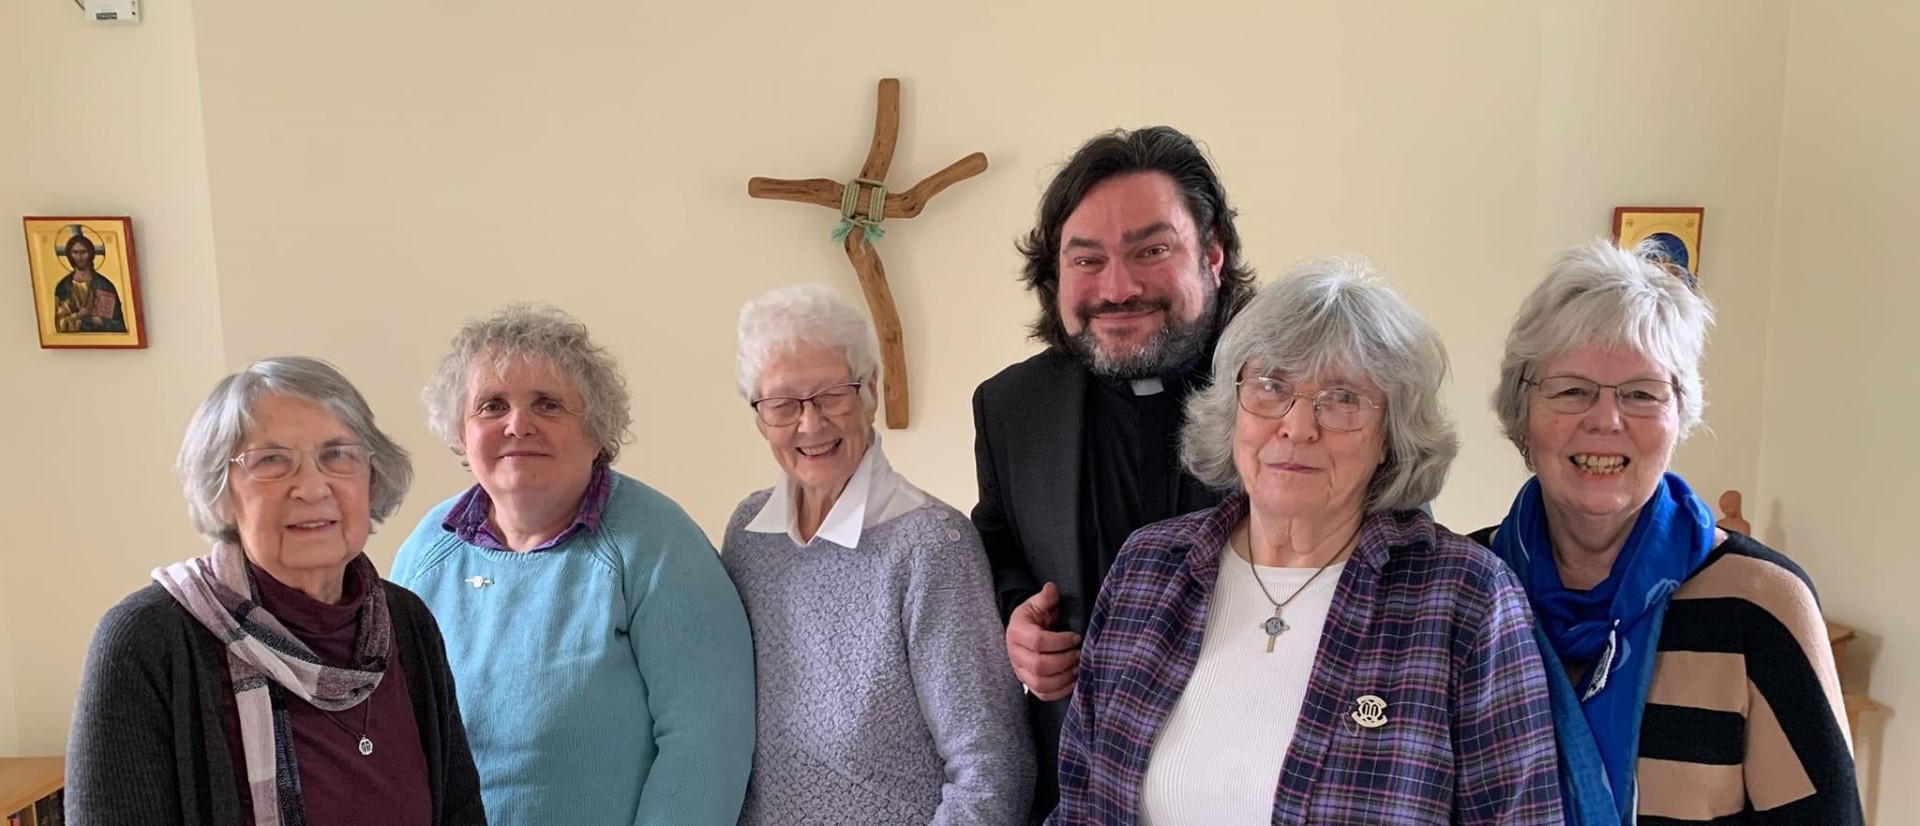 Revd James Stewart and some of the Trustees of Mothers Union in the Diocese of Norwich.